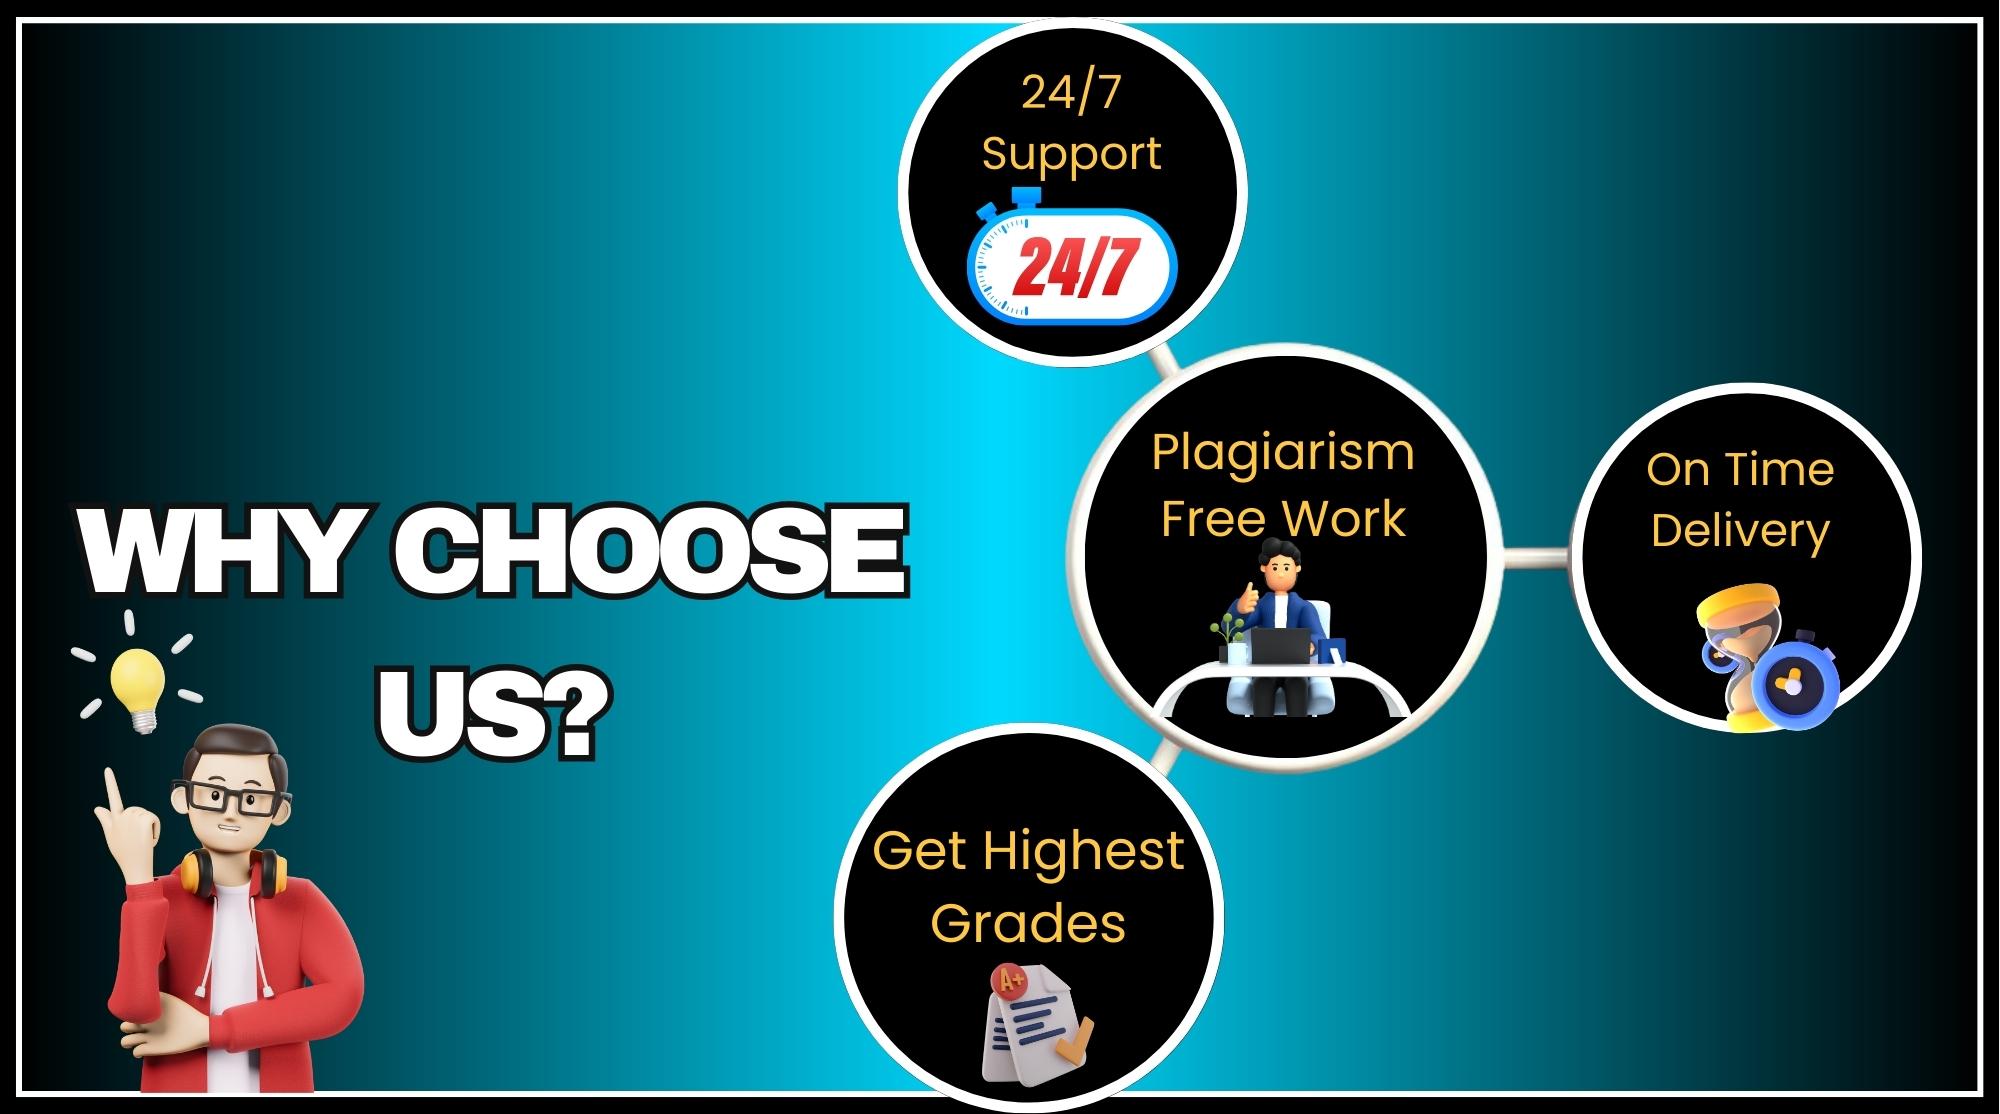 Choose Value Assignment Help - Economics Assignment Help - 24/7 Support - Plagiarism Free - Delivery on Time - Higher Grades